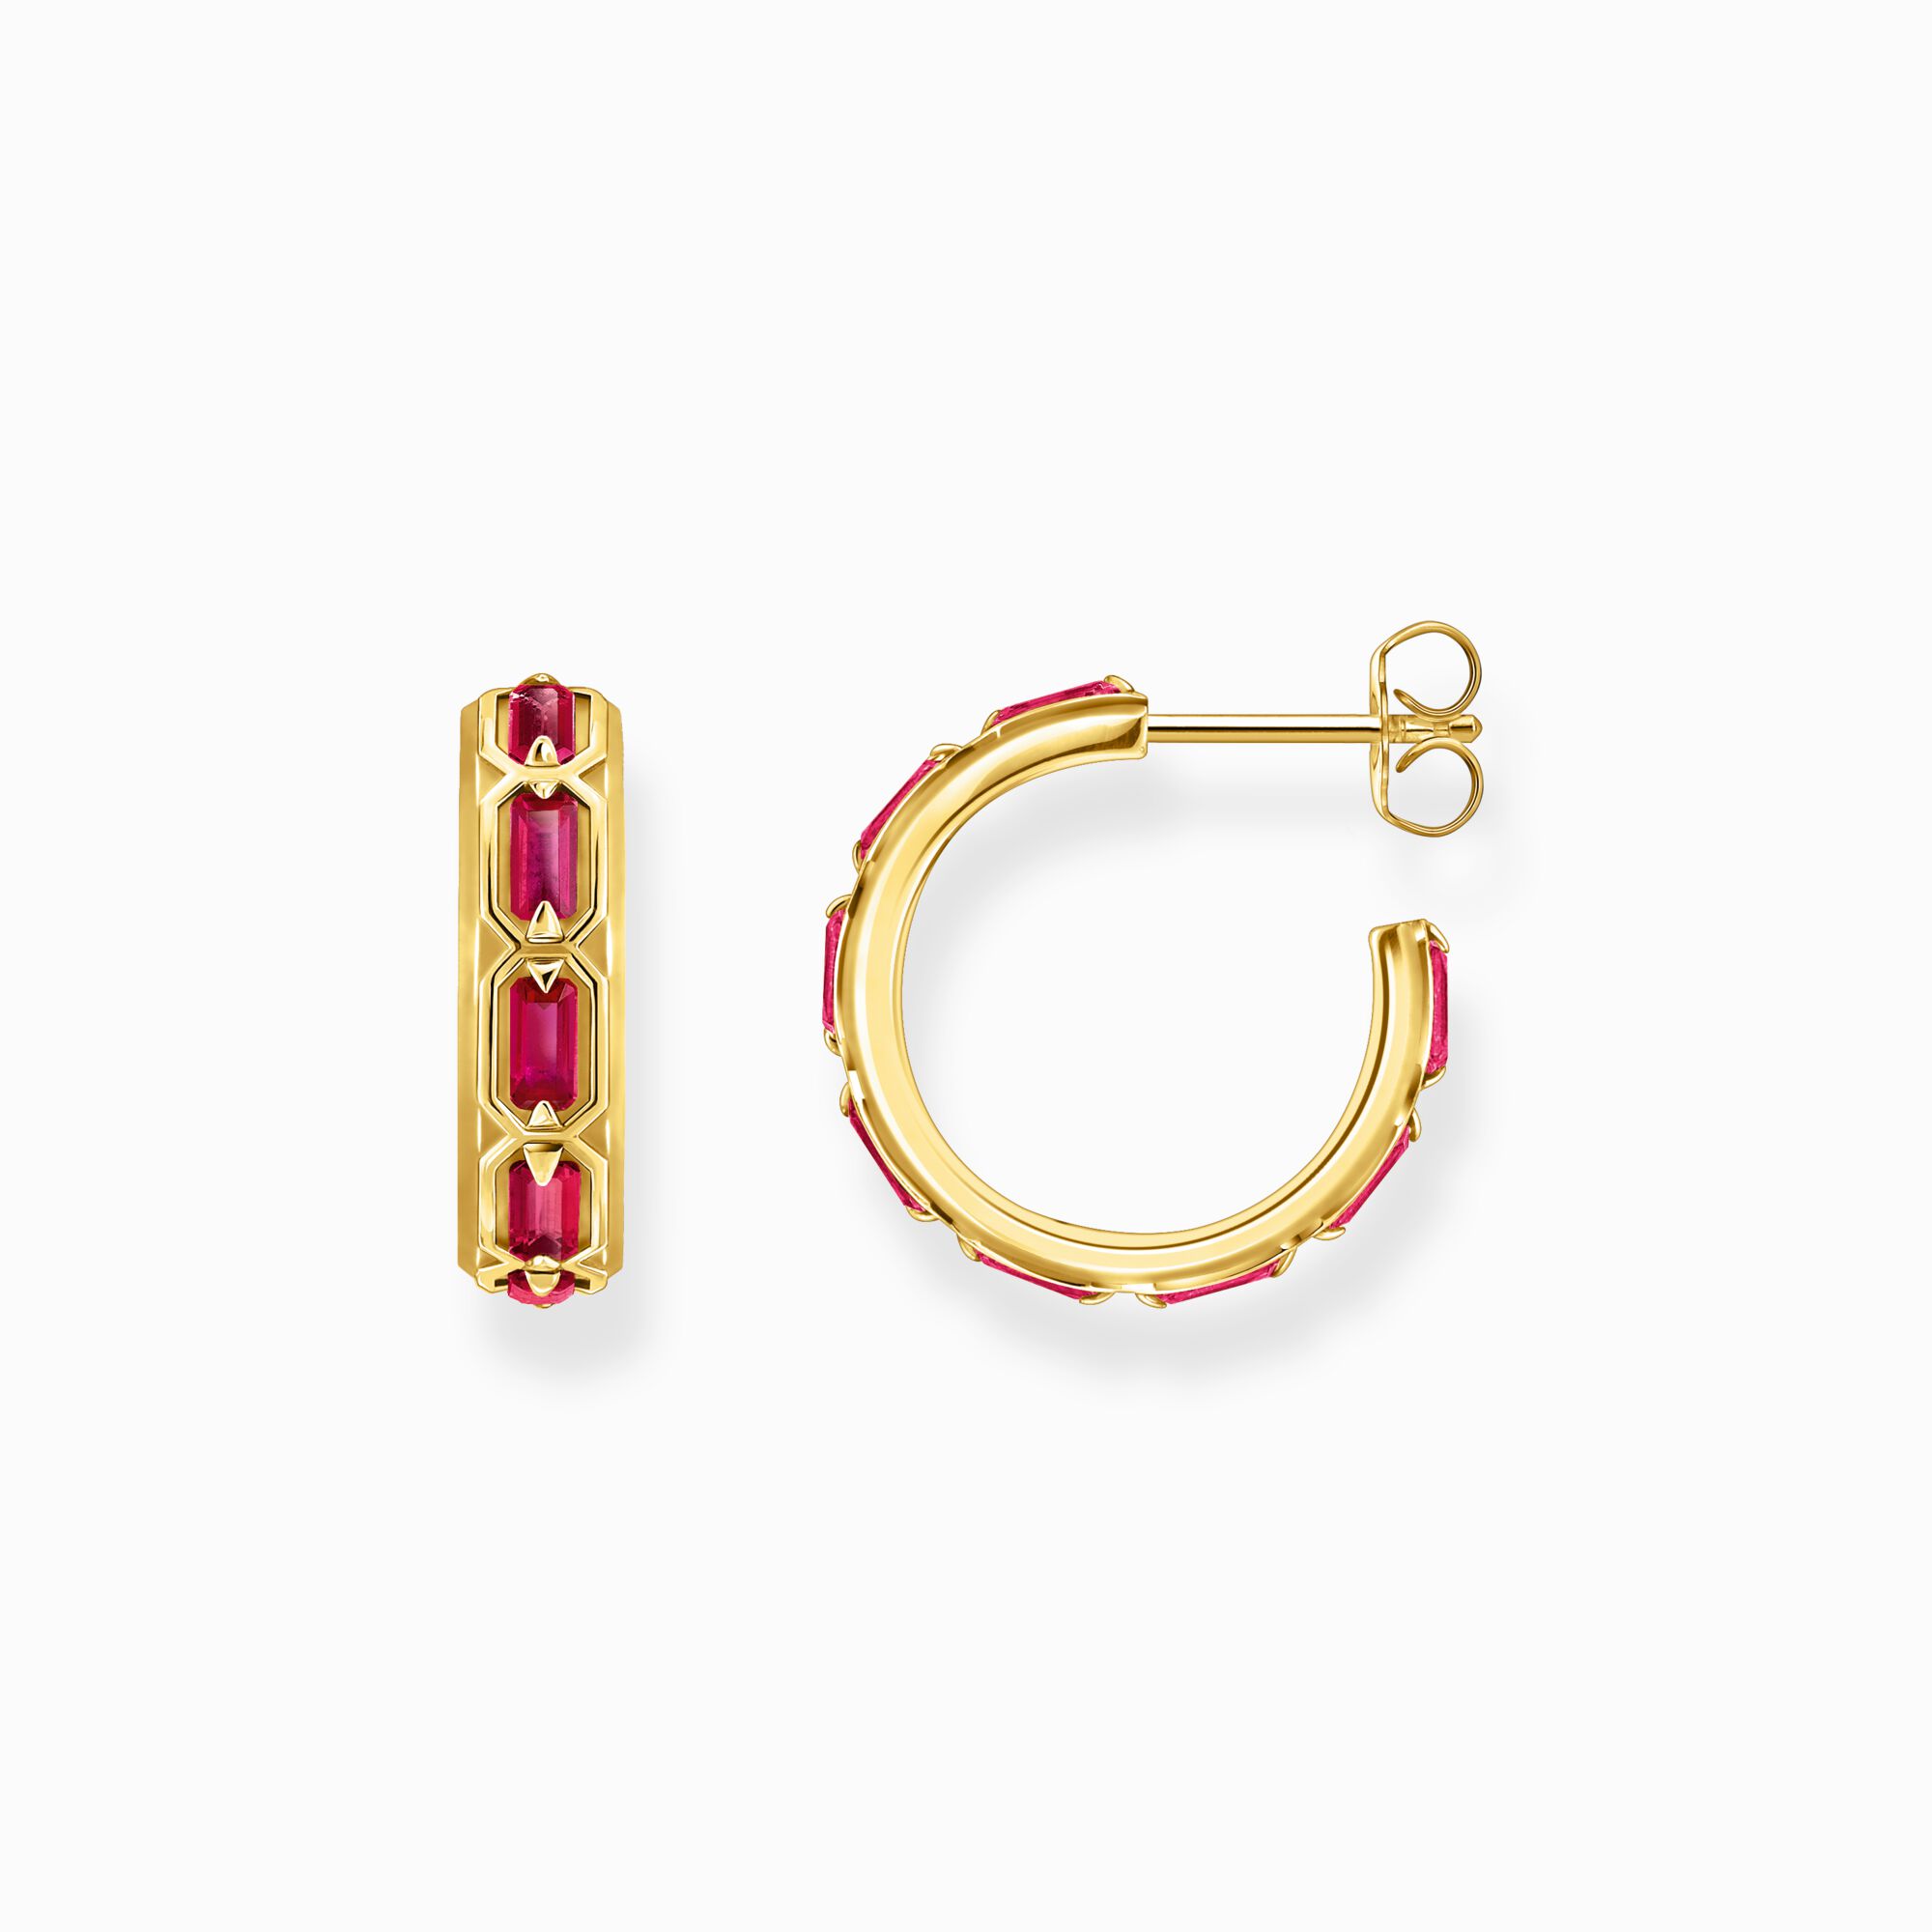 Thomas Sabo + Yellow-Gold Plated Hoop Earrings With Red Stones